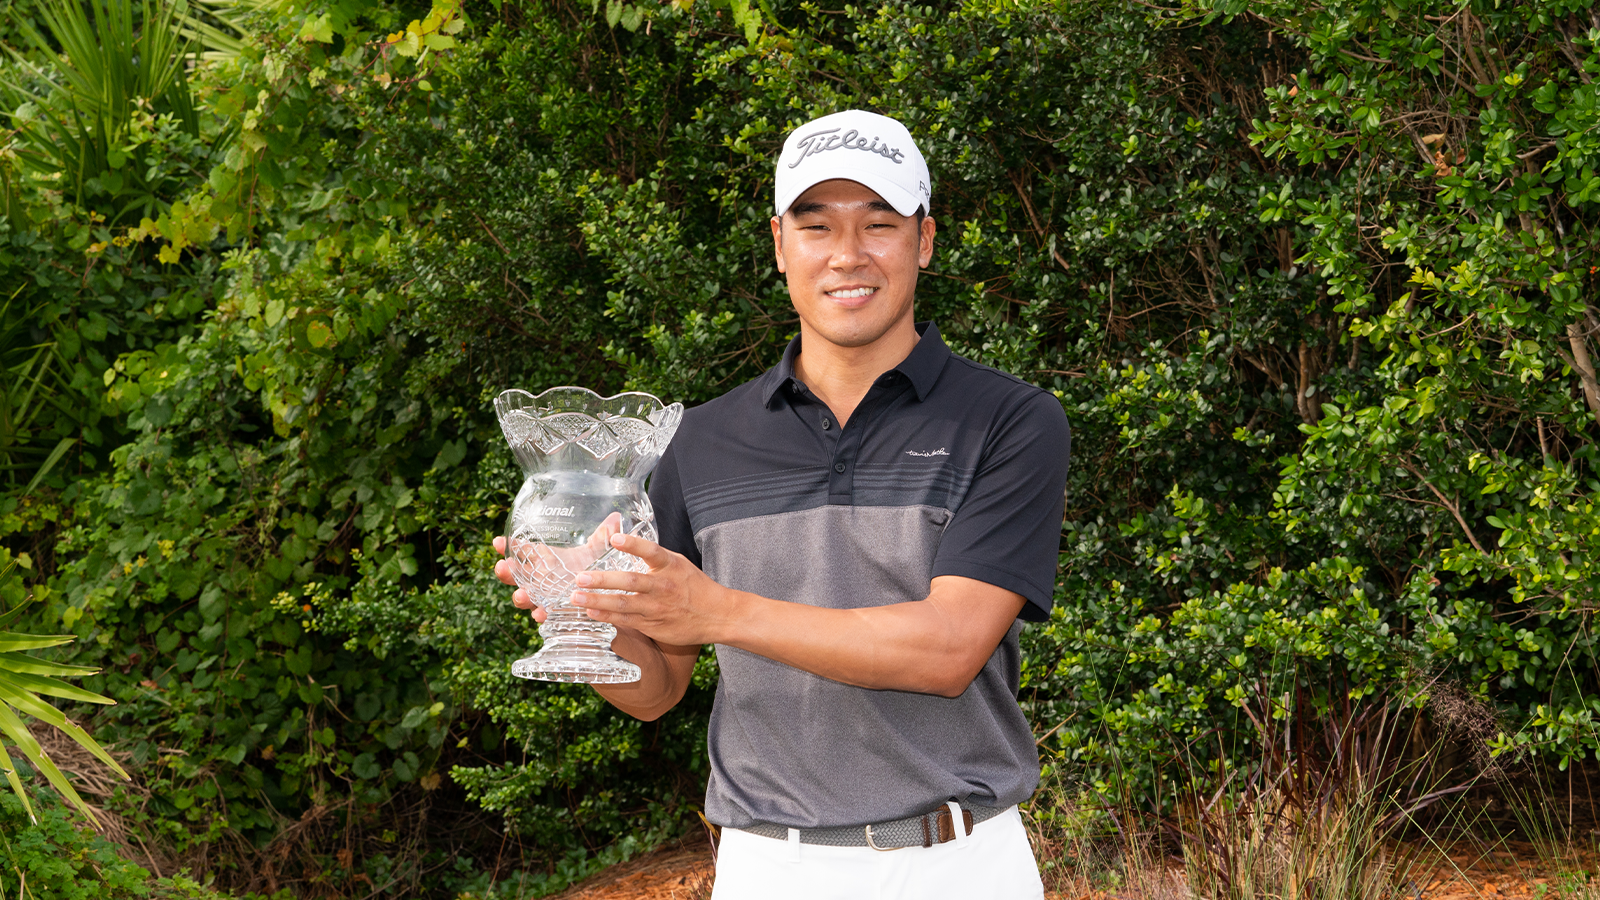 2021 Champion Jin Chung poses for a photo with the trophy after the final round of the 45th National Car Rental Assistant PGA Professional Championship held at the PGA Golf Club on November 14, 2021 in Port St. Lucie, Florida. (Photo by Hailey Garrett/PGA of America)